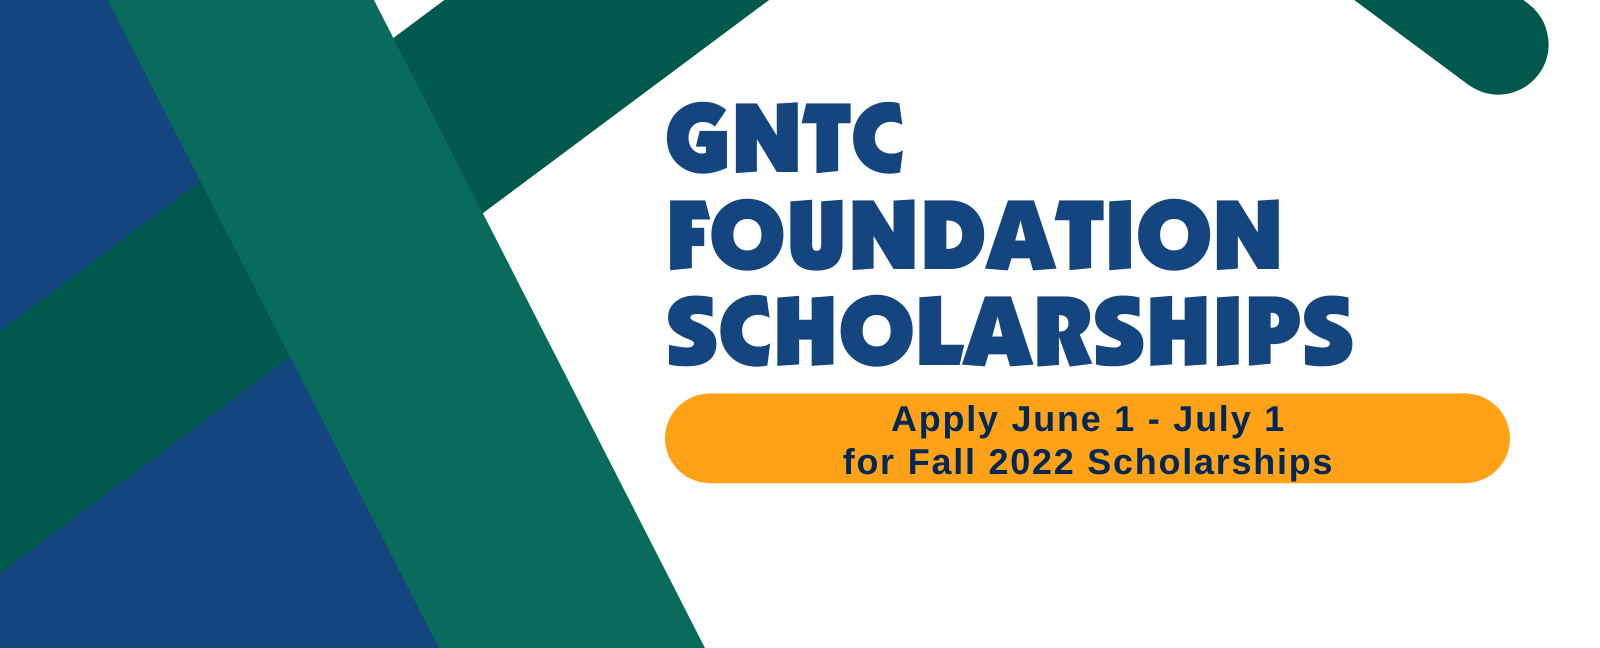 GNTC Foundation Scholarships Apply June 1-July 1 for Fall 2022 Scholarships